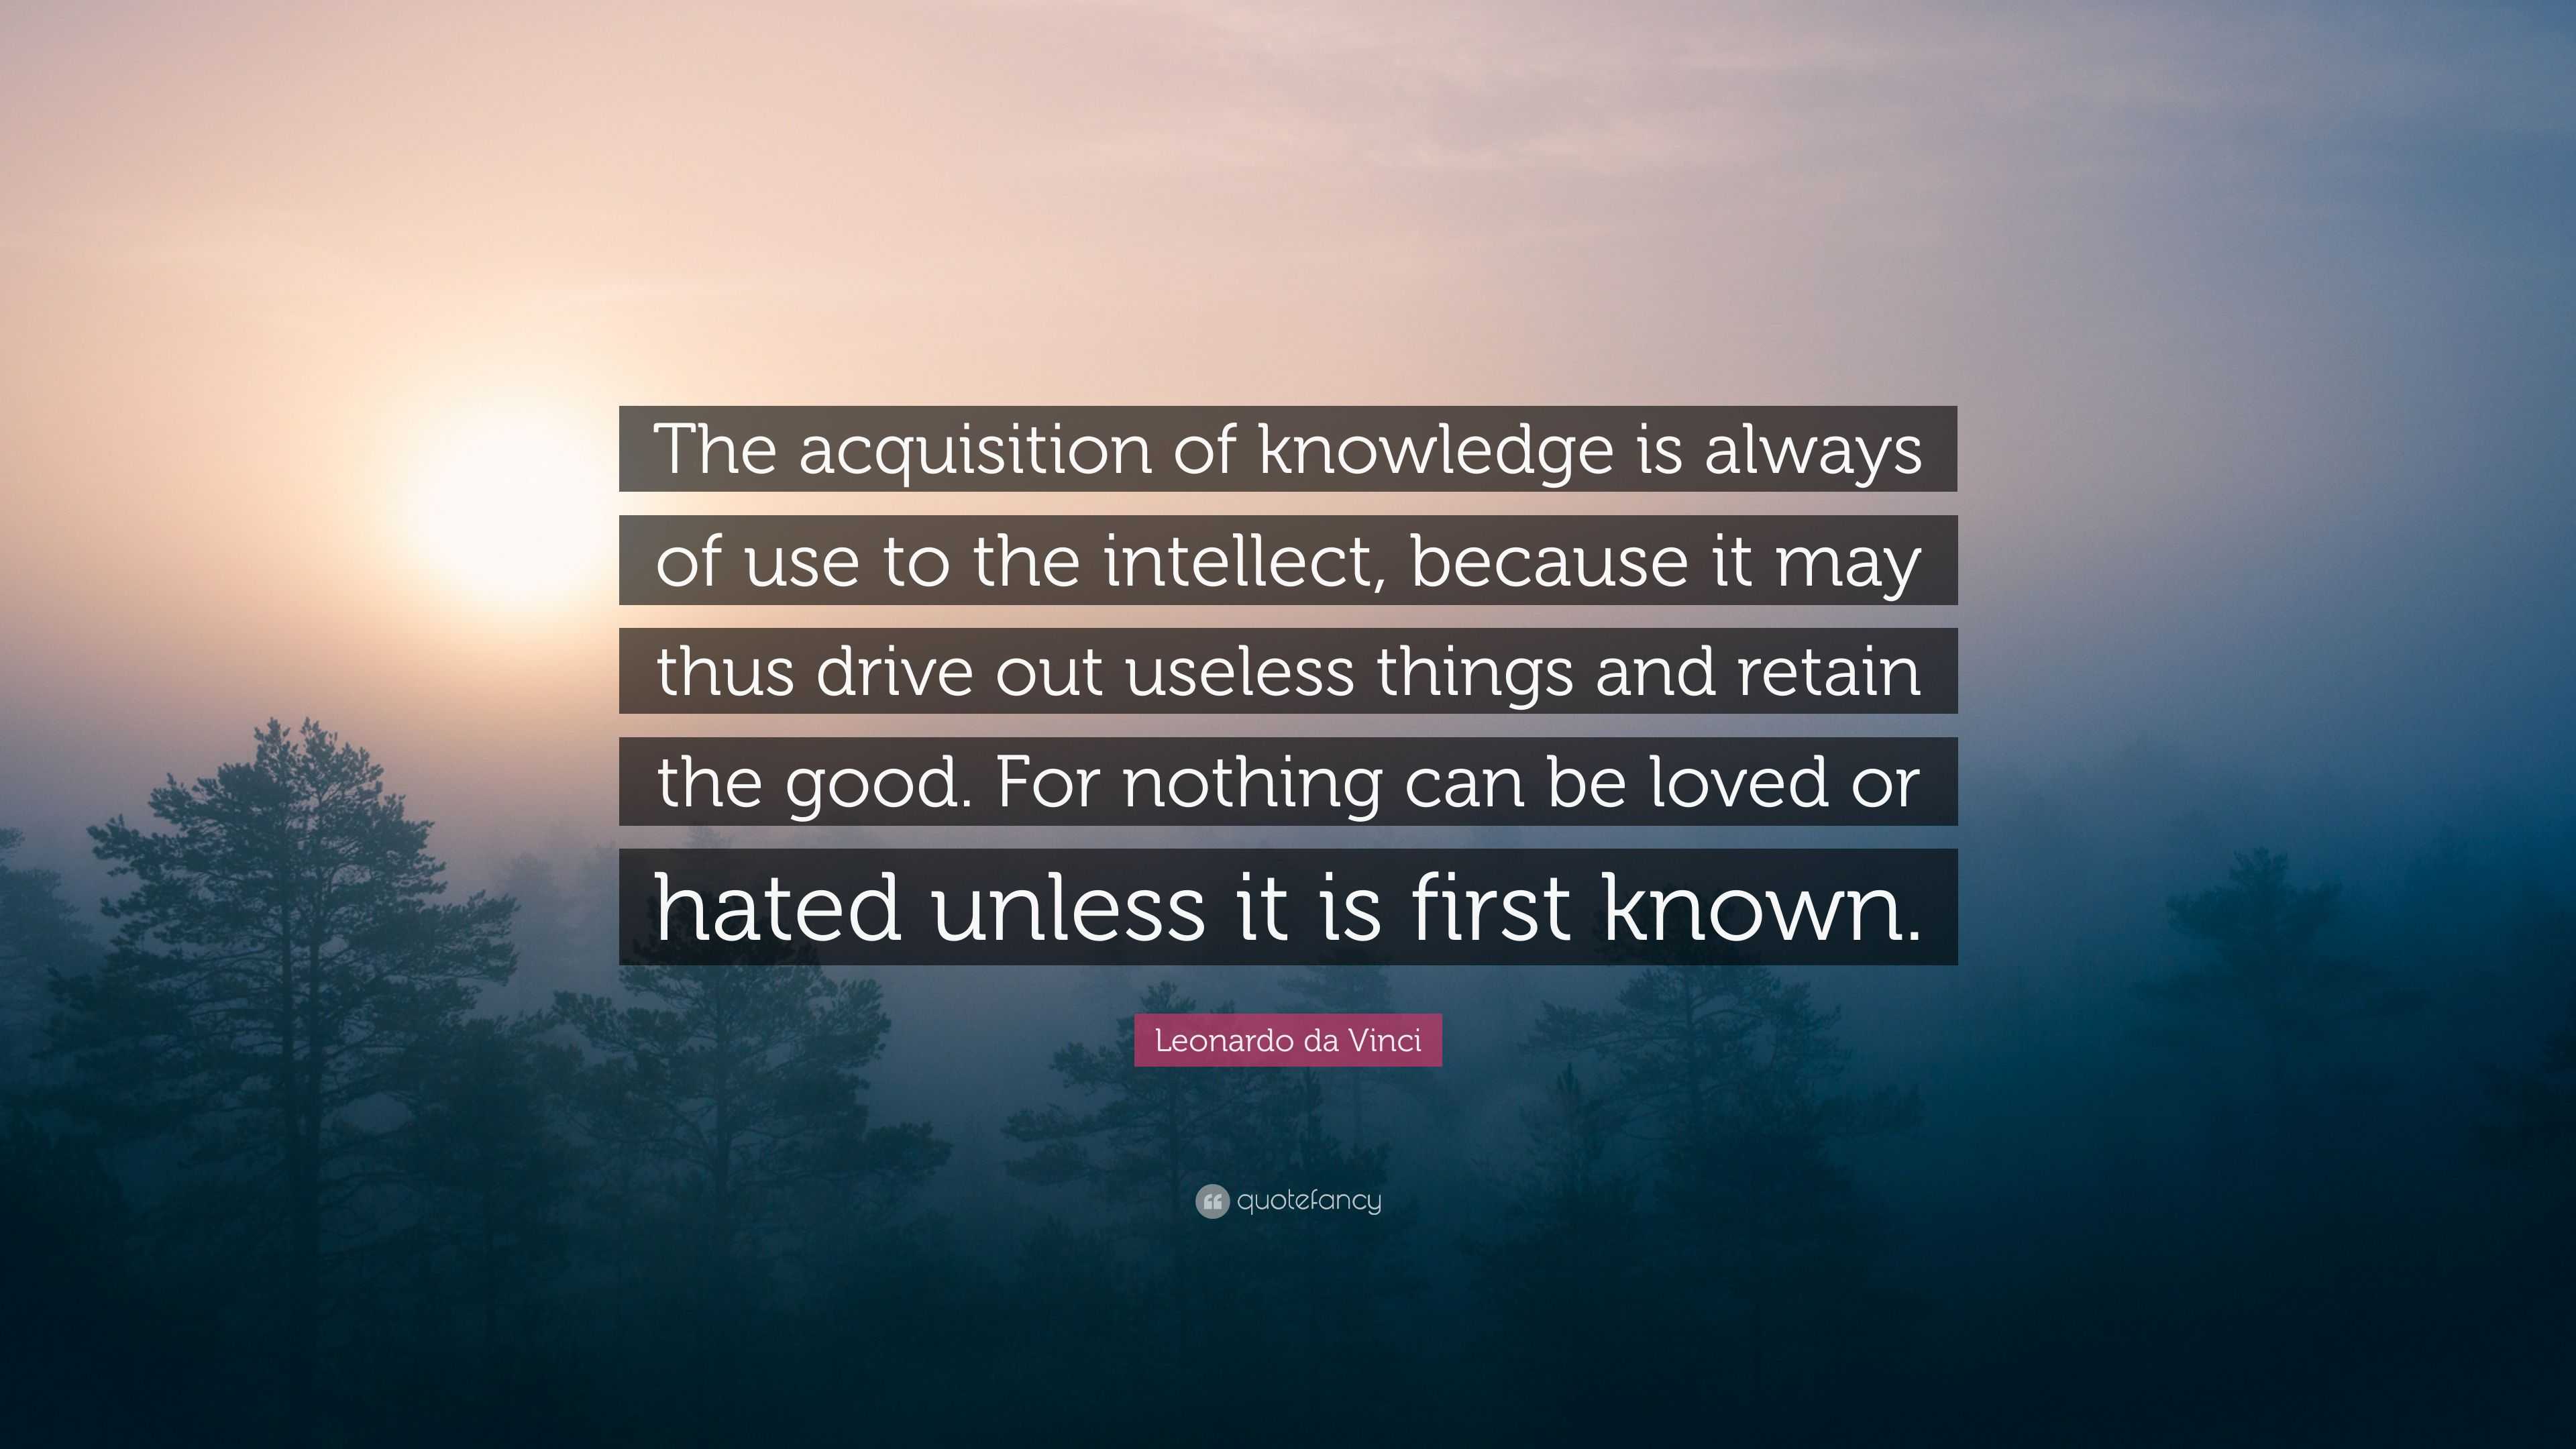 Leonardo da Vinci Quote: “The acquisition of knowledge is always of use ...